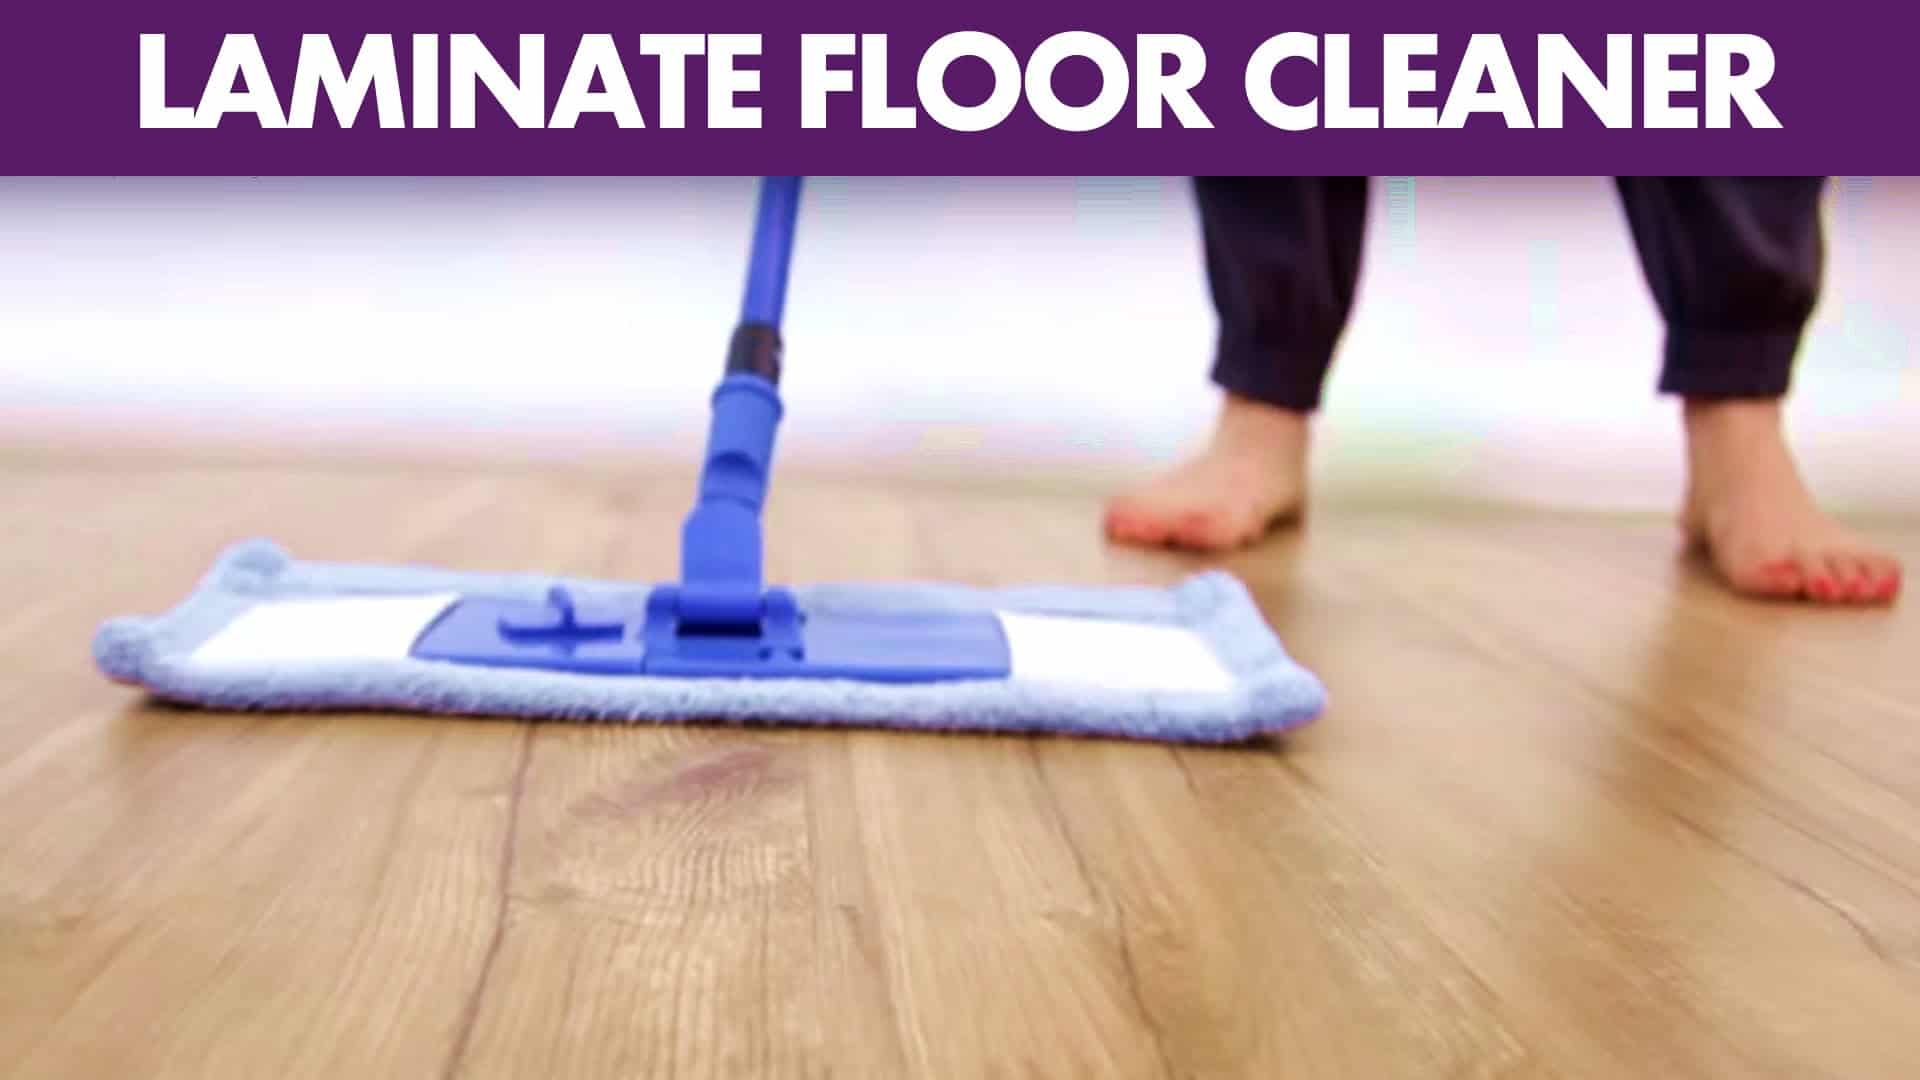 Laminate Floor Cleaner Day 9 31, How Can I Shine My Laminate Floors